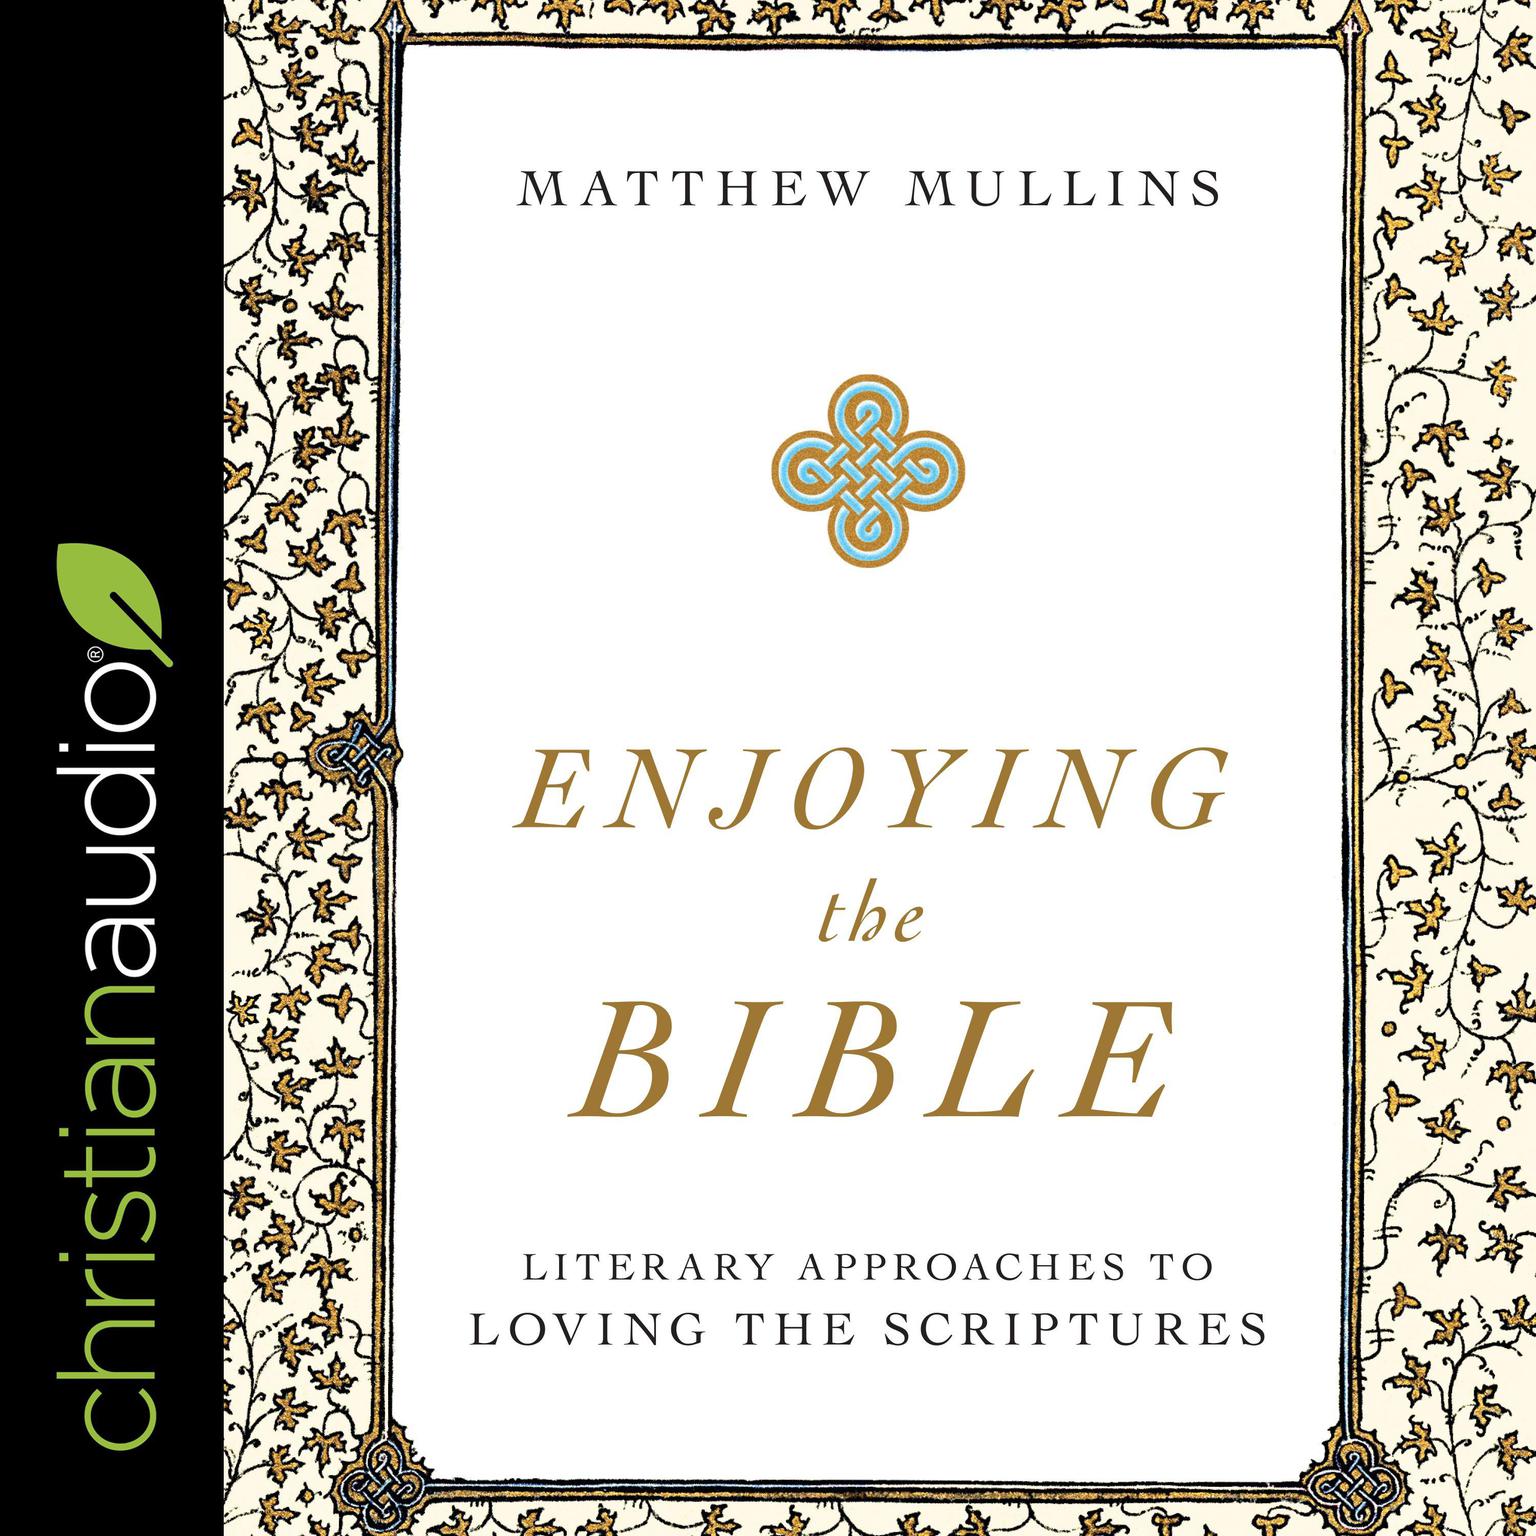 Enjoying the Bible: Literary Approaches to Loving the Scriptures Audiobook, by Matthew Mullins